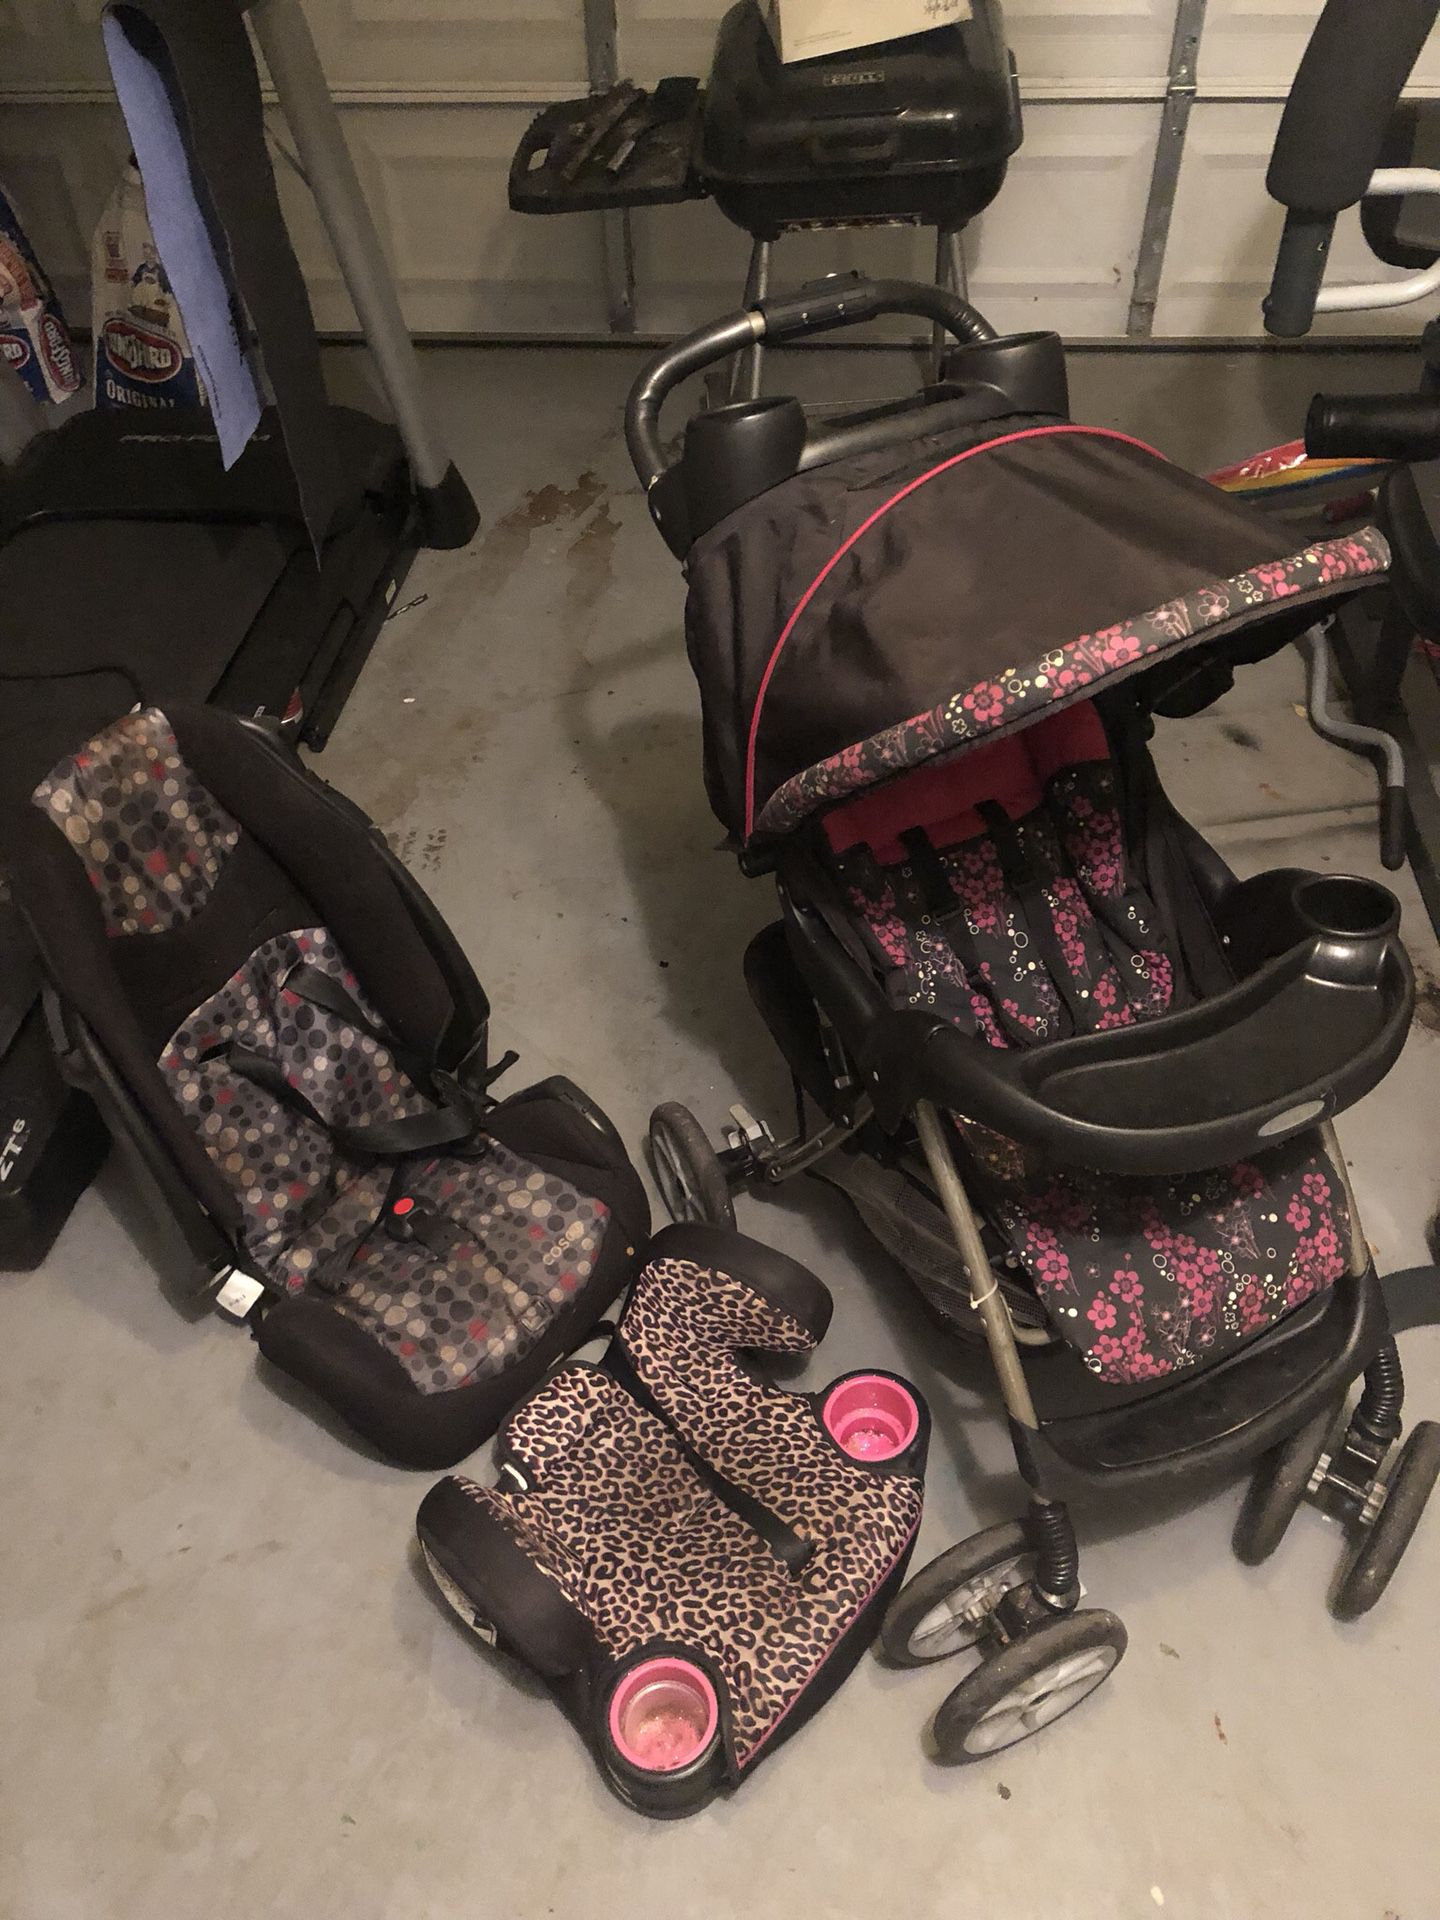 Graco Quick Fold stroller booster seat and Car seat all for $40 it is used and needs some cleaning but it works perfectly well and it’s at a cheap pr